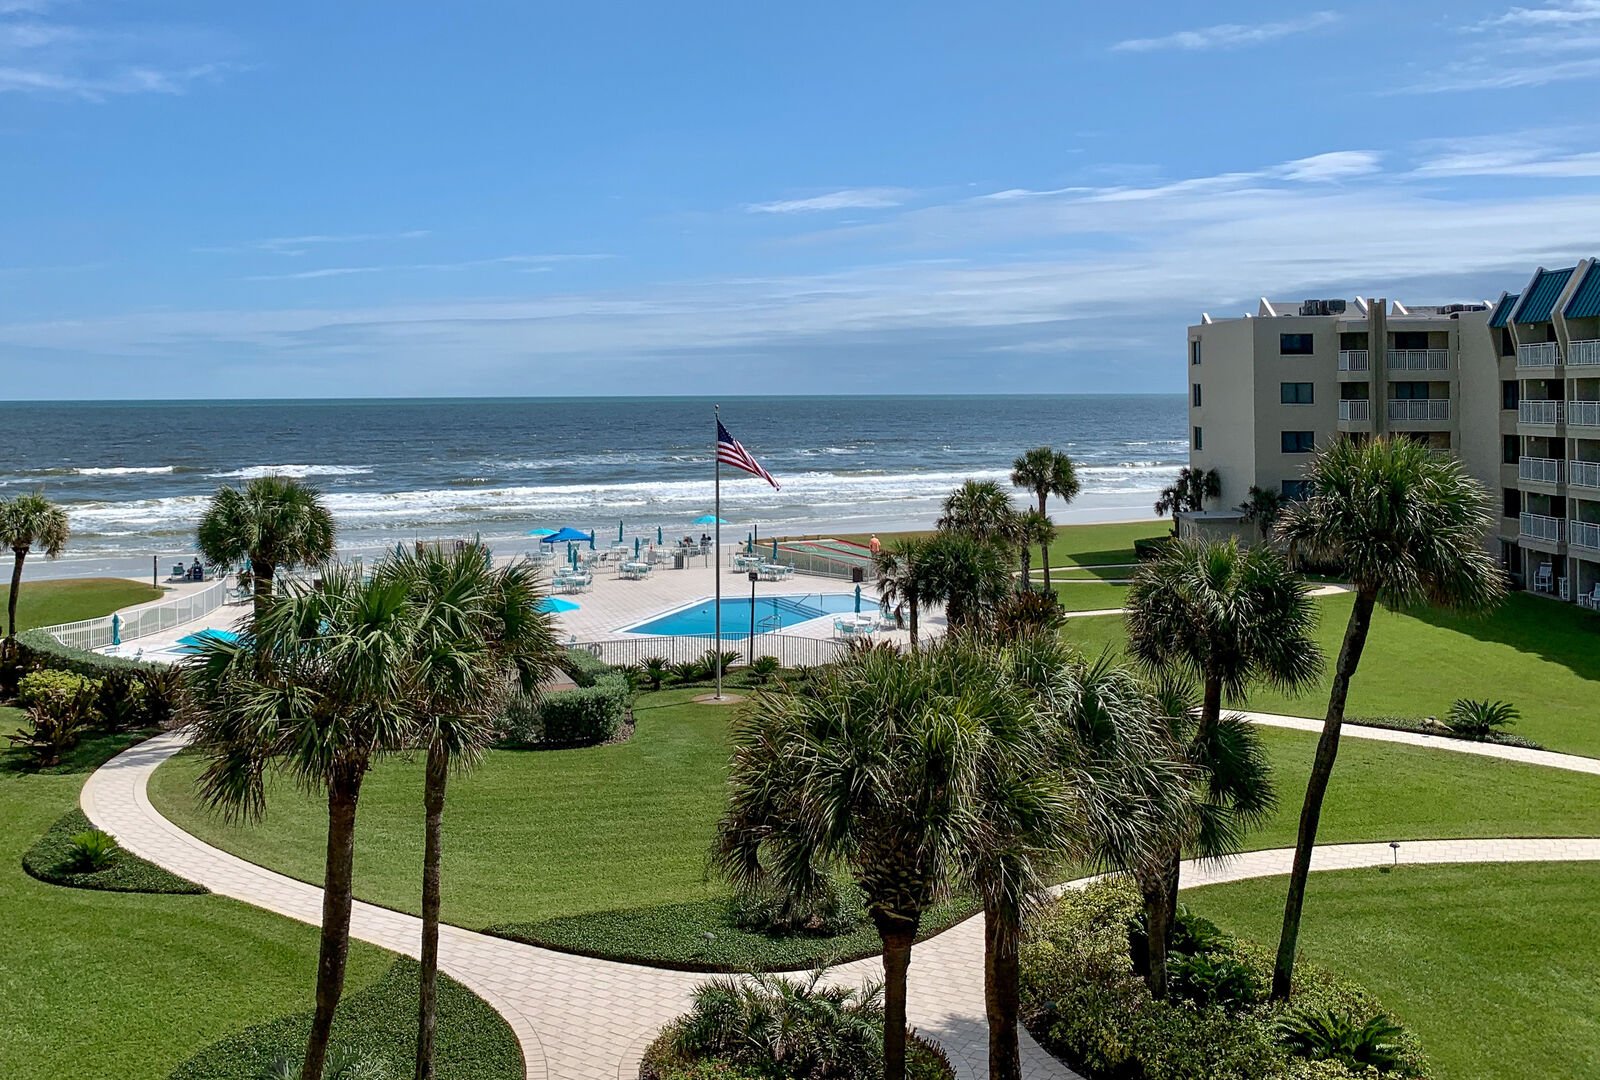 Balcony view from our Ocean View Condo in New Smyrna Beach